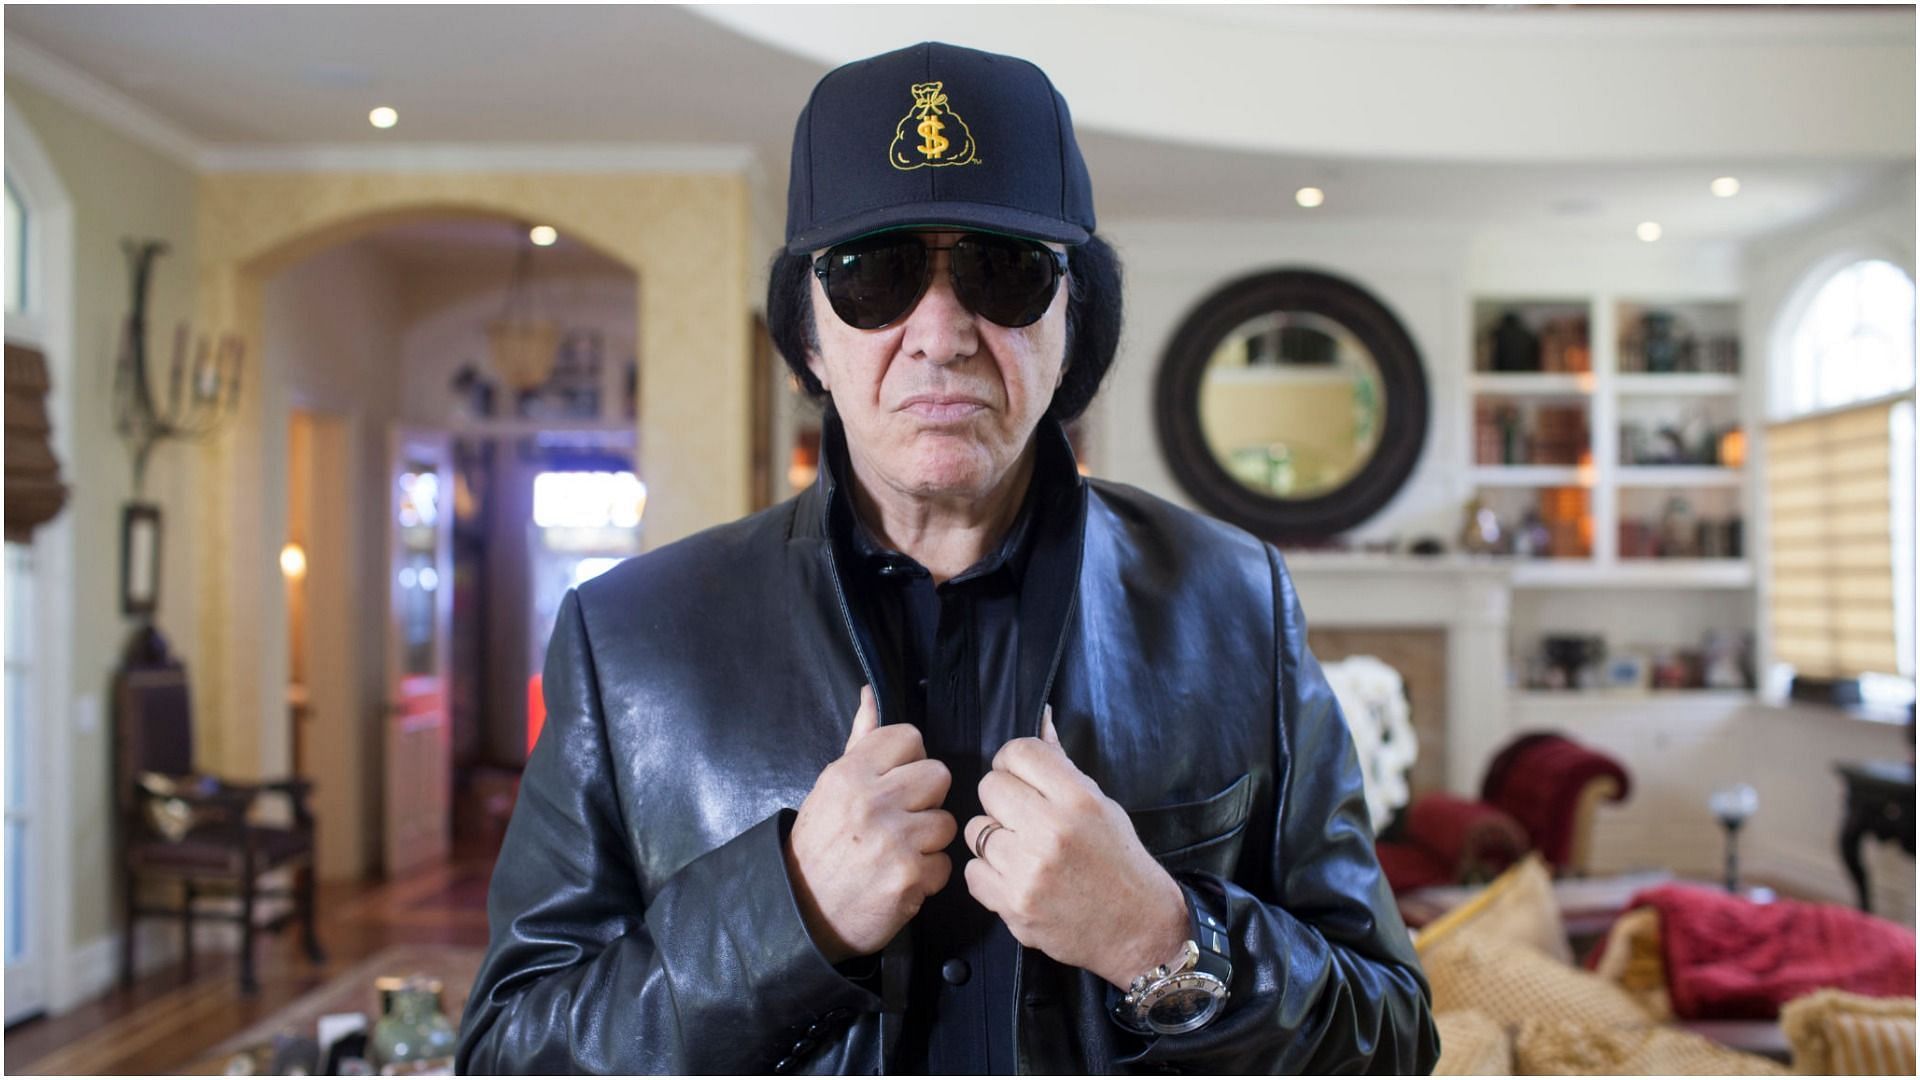 Gene Simmons is photographed for Bilanz Magazine on October 16, 2019, at home in Los Angeles, California. (Image via Getty Images)